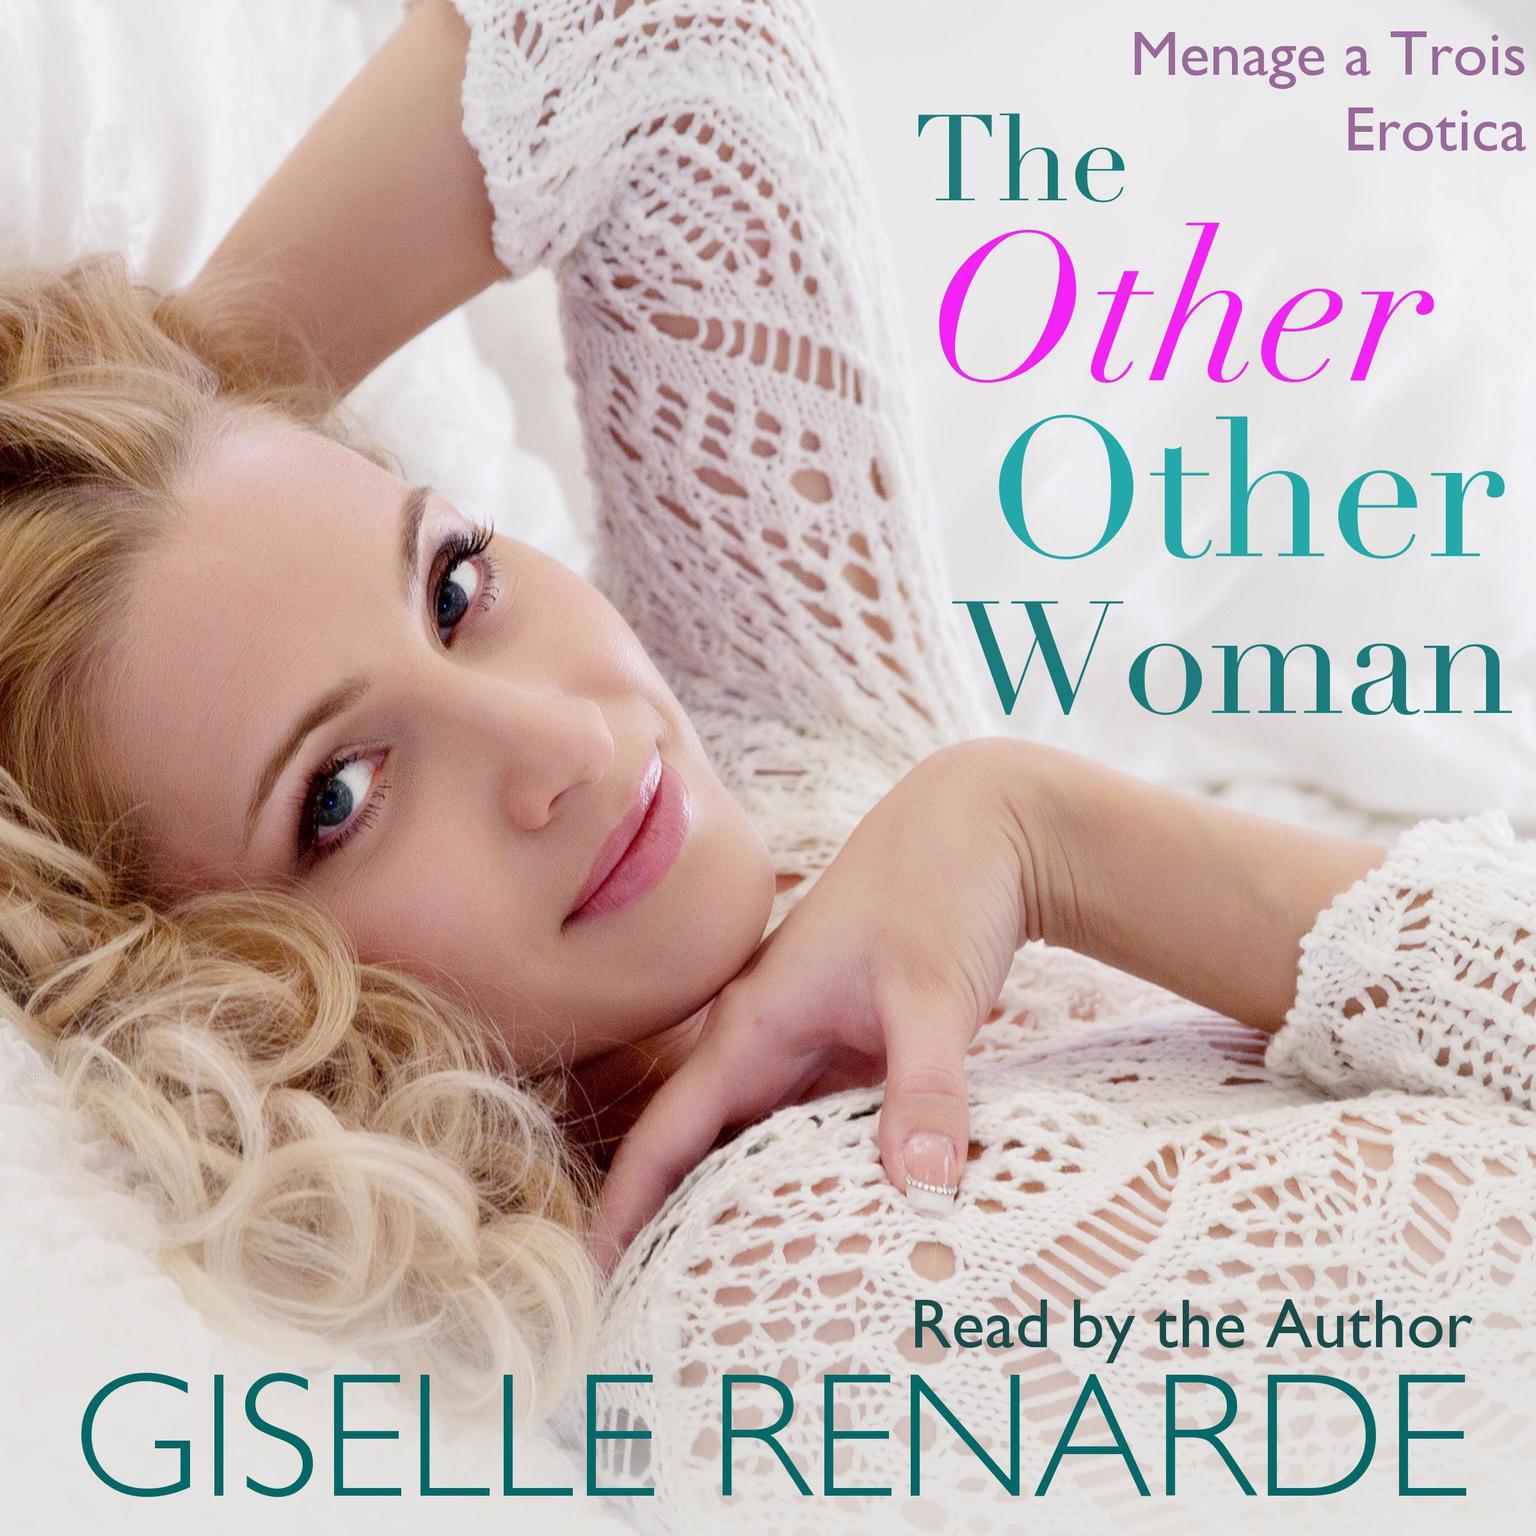 The Other Other Woman: Menage a Trois Erotica Audiobook, by Giselle Renarde